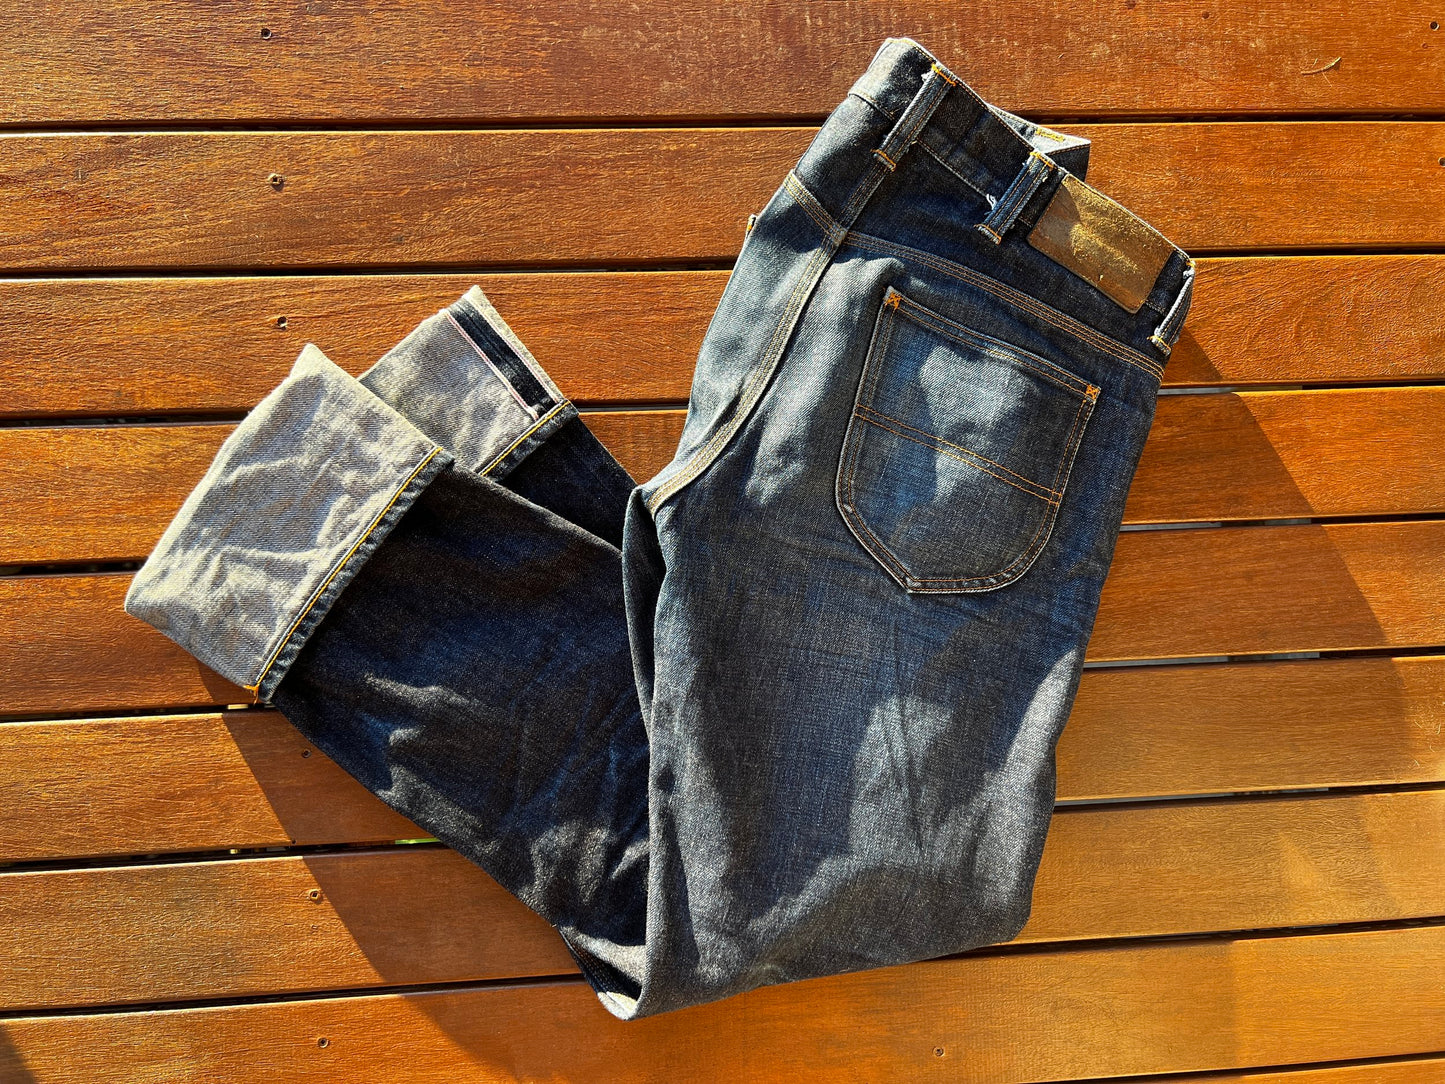 the Black Bear Brand ONE Jeans